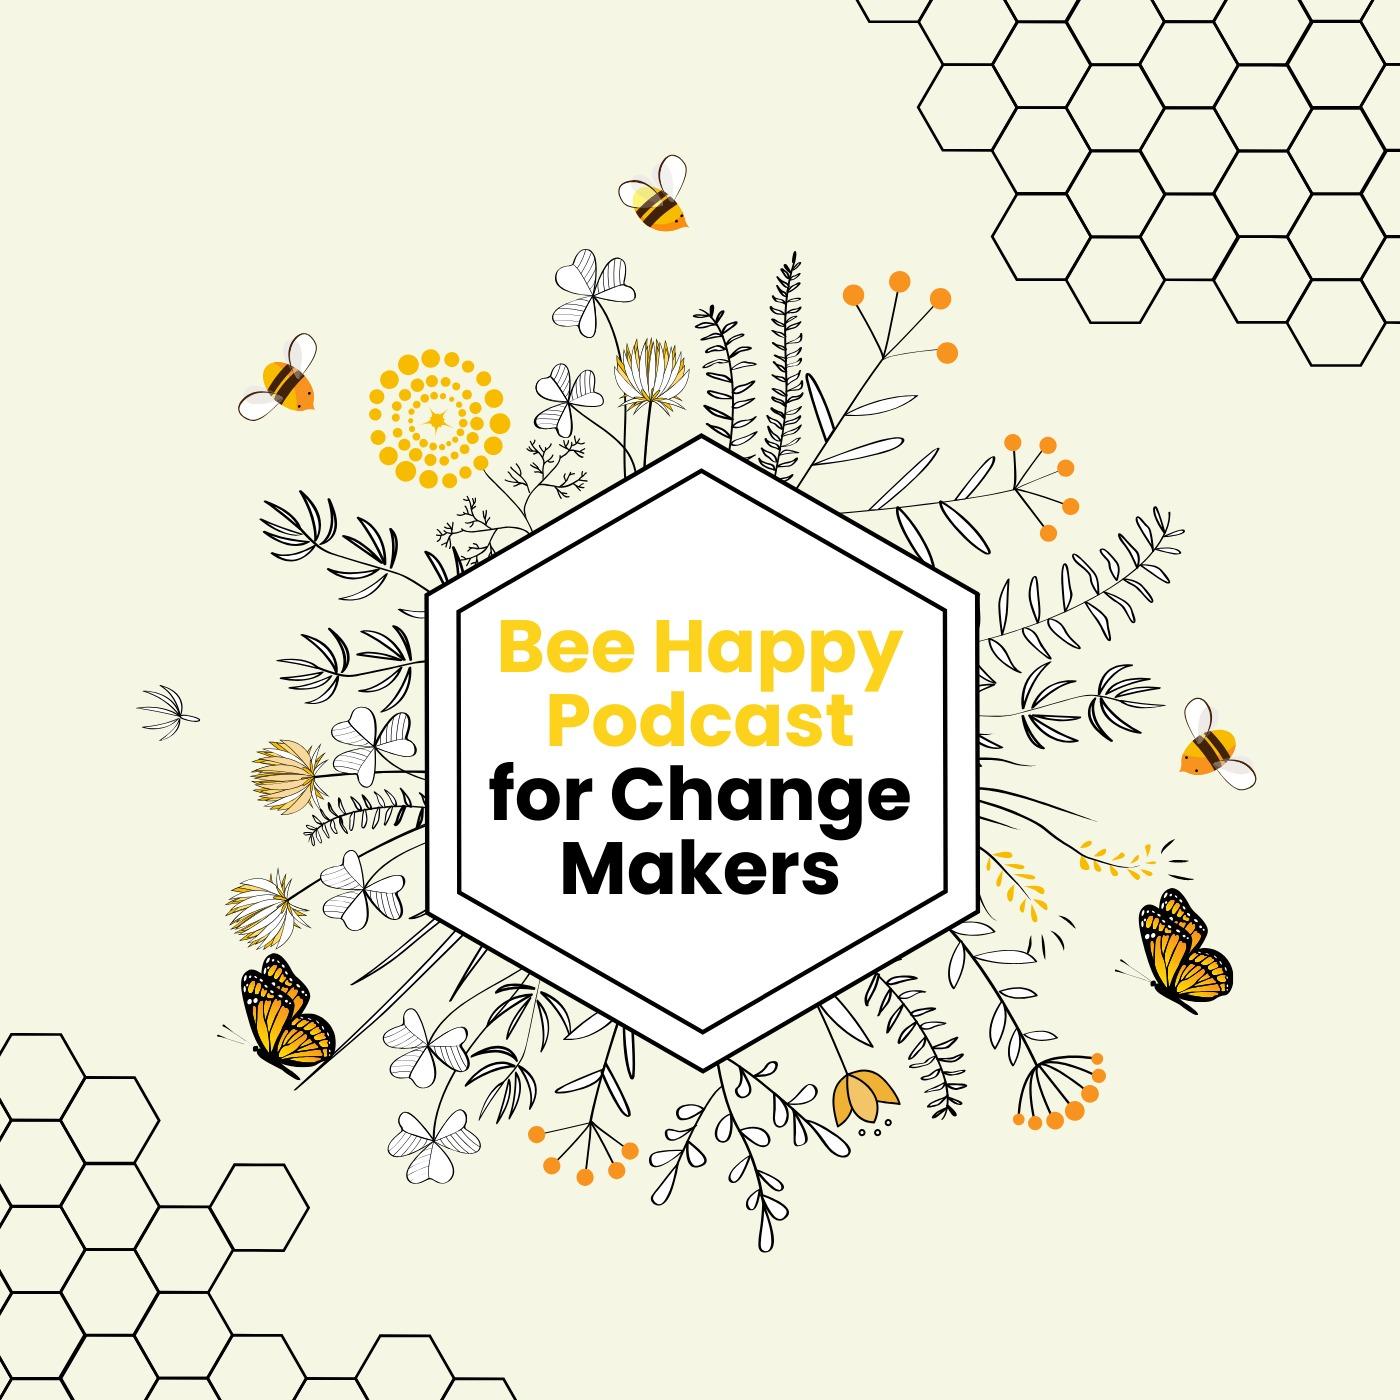 Bee Happy Podcast for Change Makers